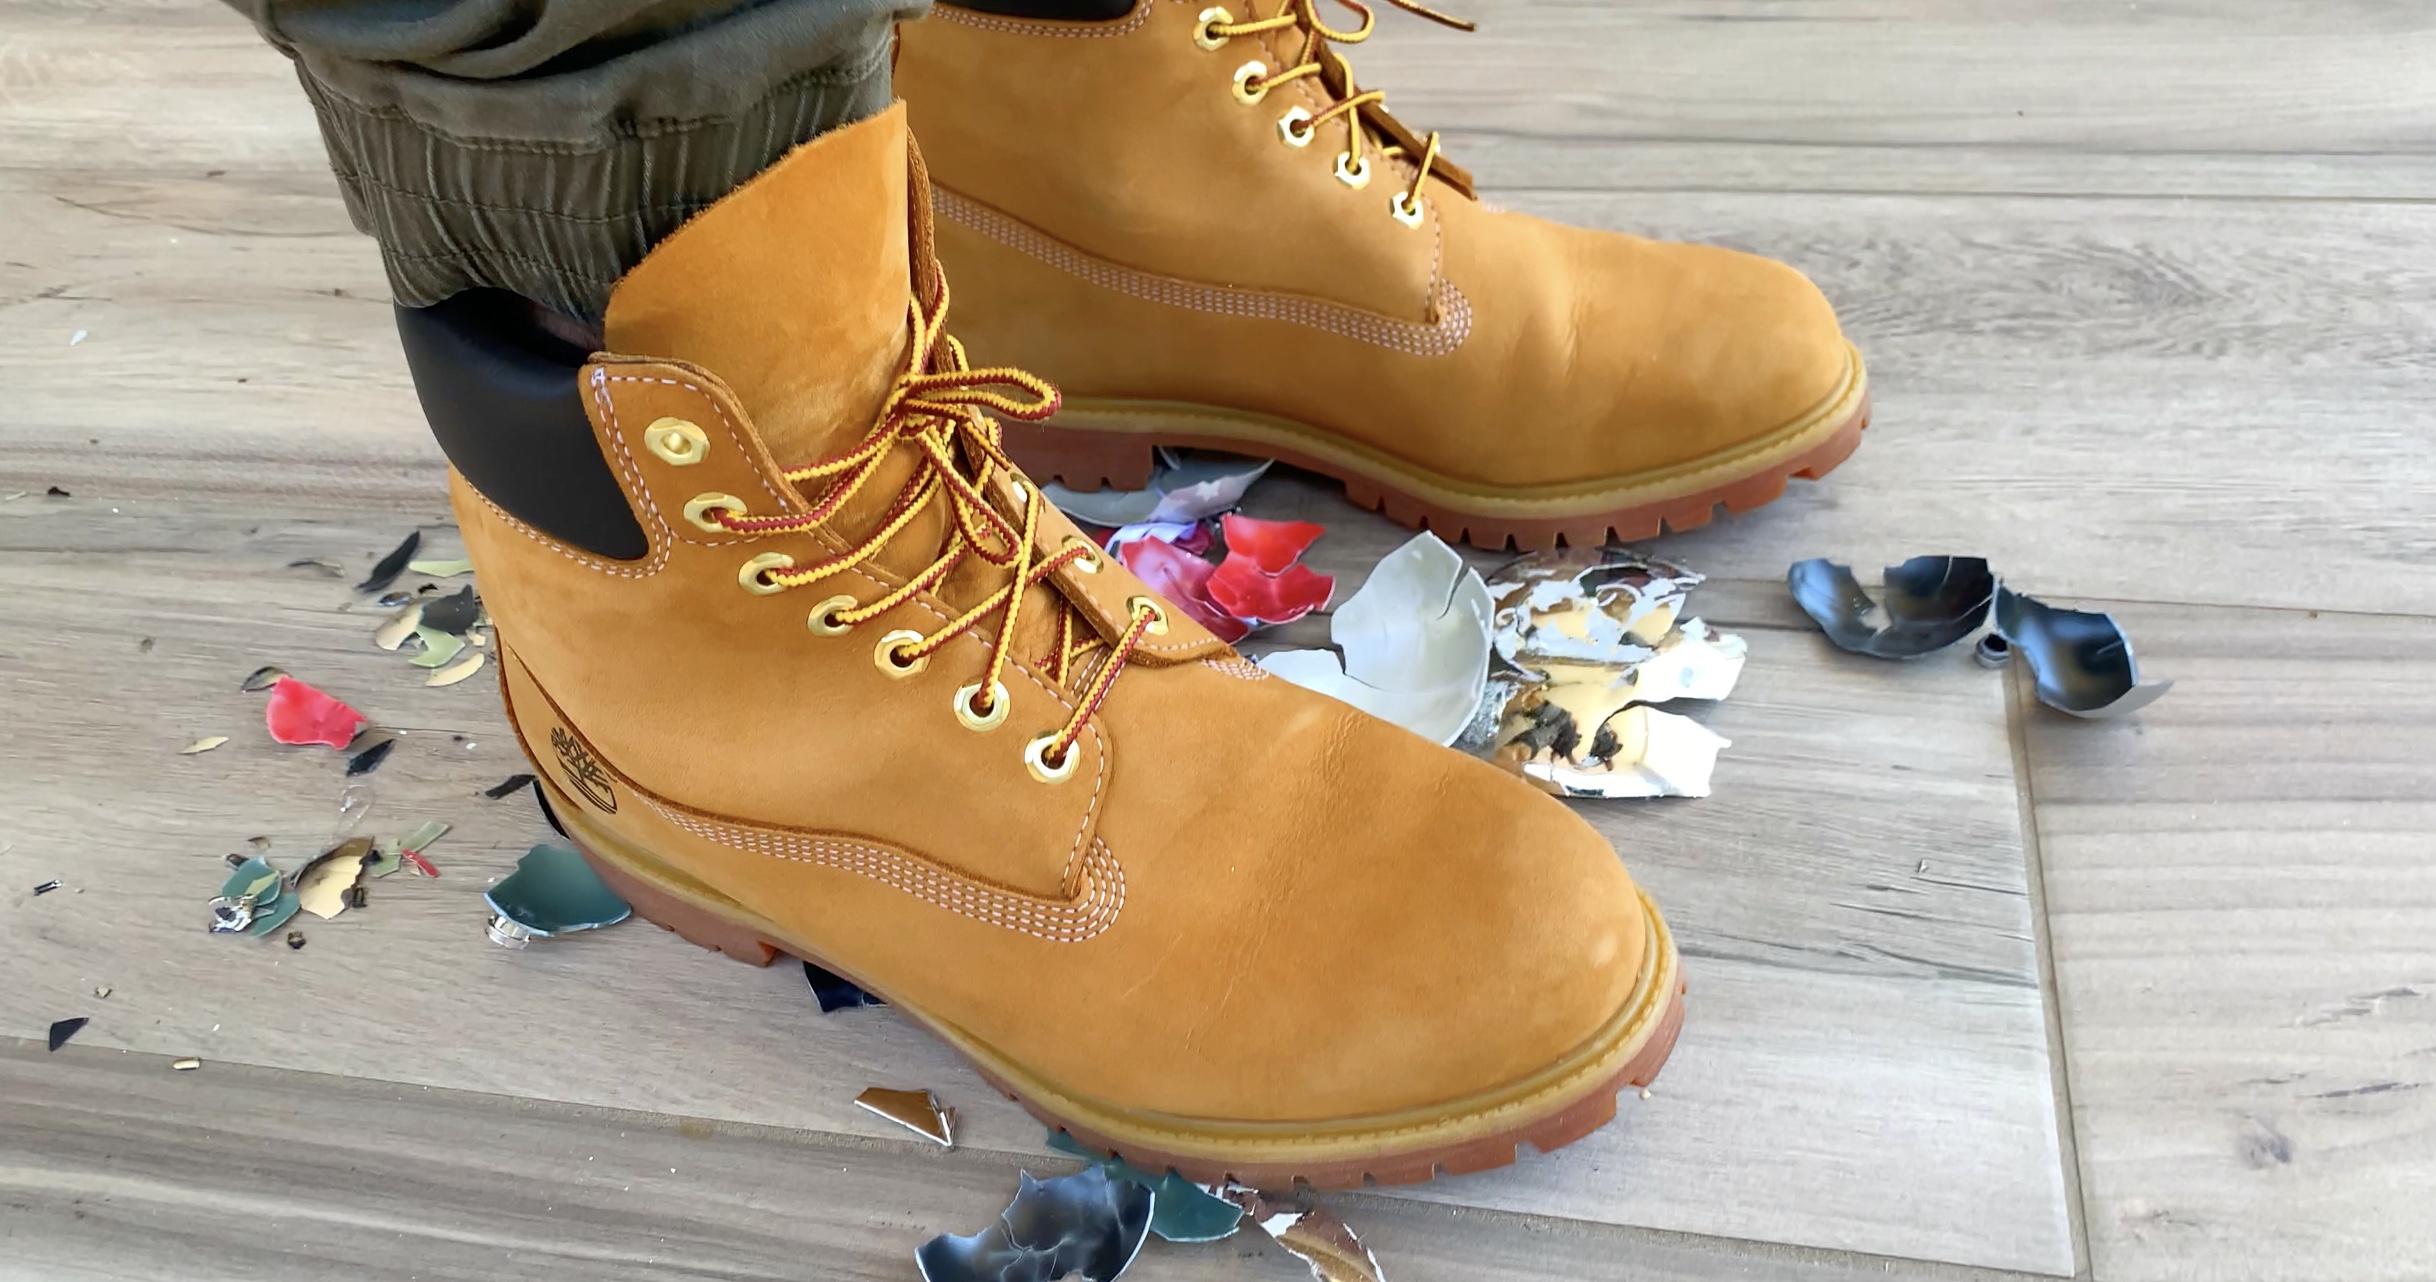 Timbs destroy ornaments